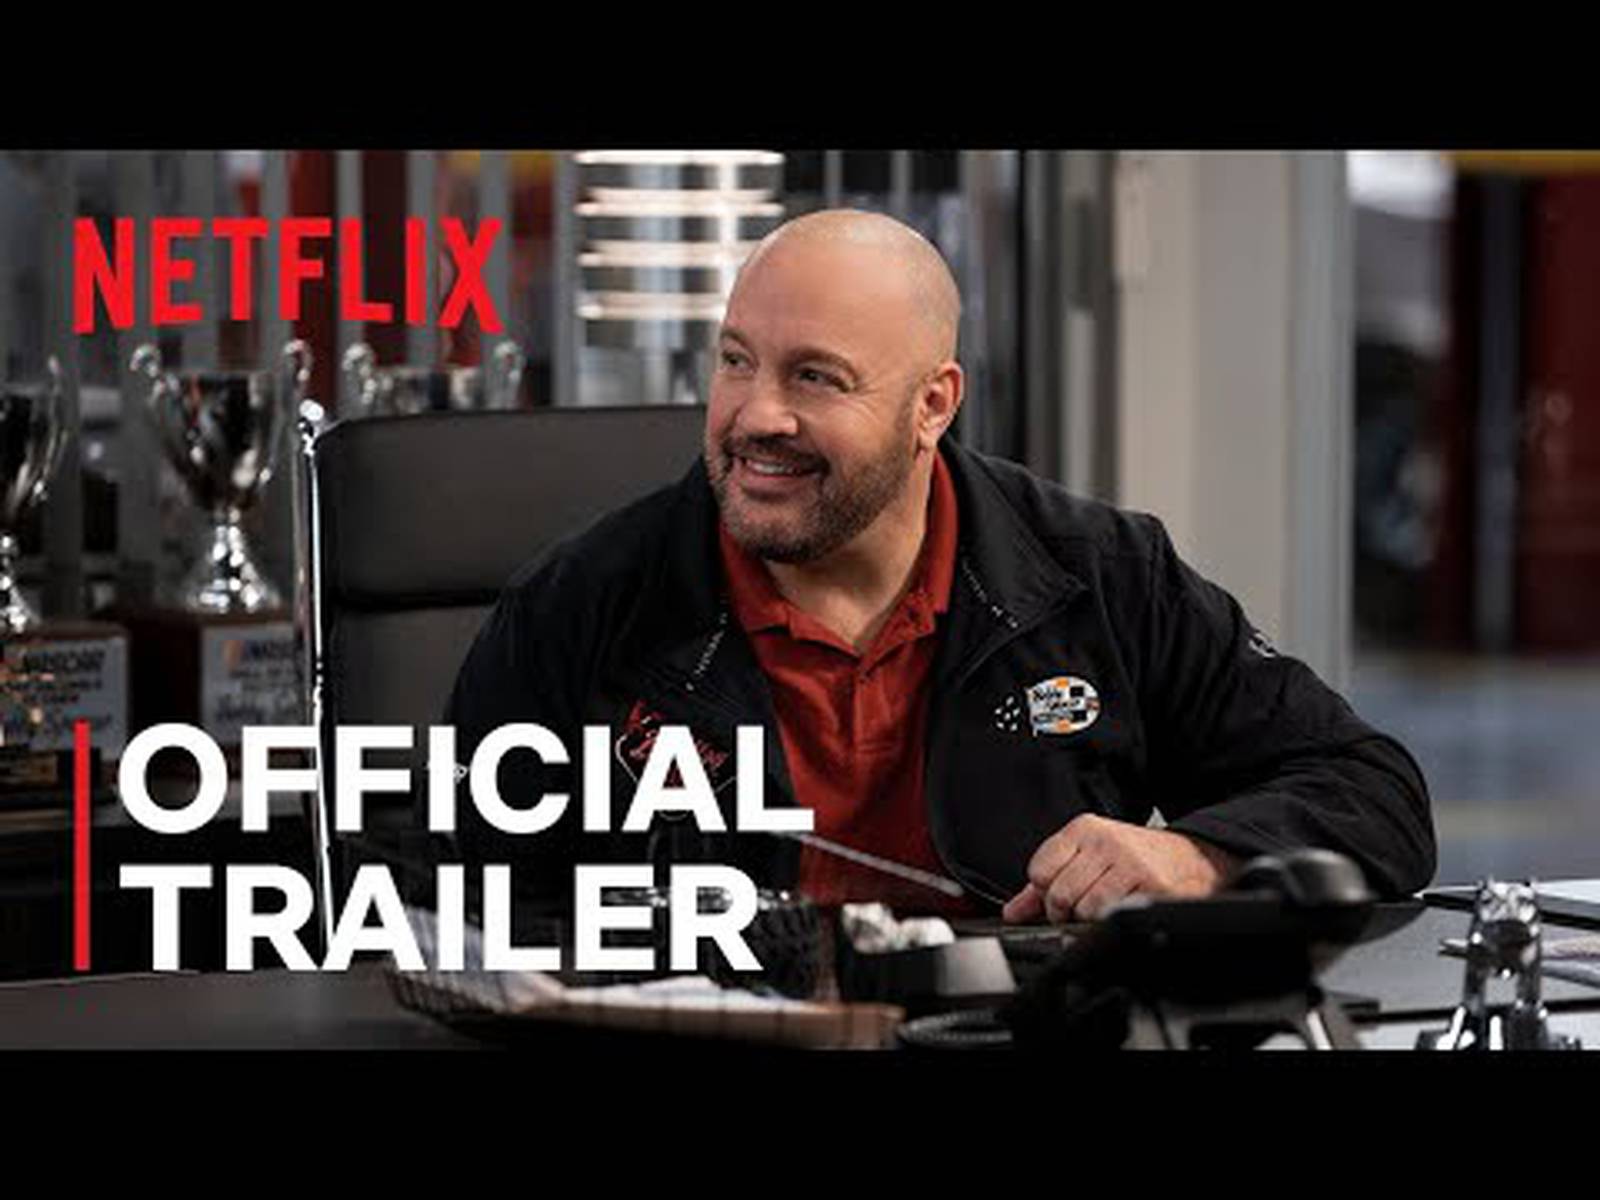 Watch Trailer For New Kevin James Netflix Series “the Crew” Where He Plays A Nascar Crew Chief